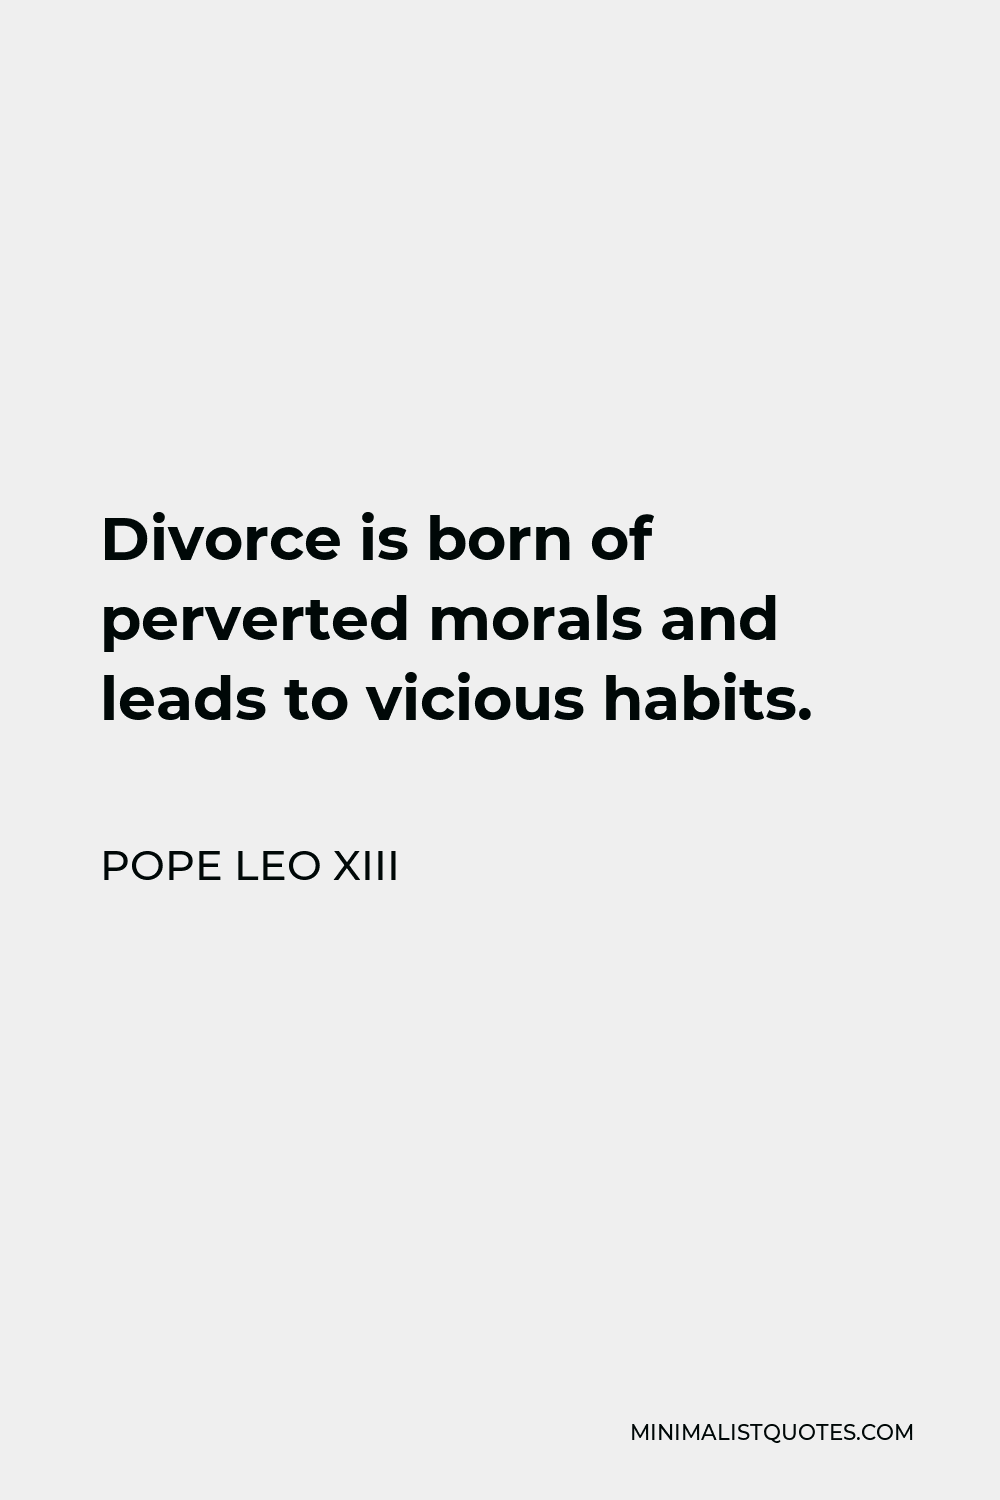 Pope Leo XIII Quote - Divorce is born of perverted morals and leads to vicious habits.